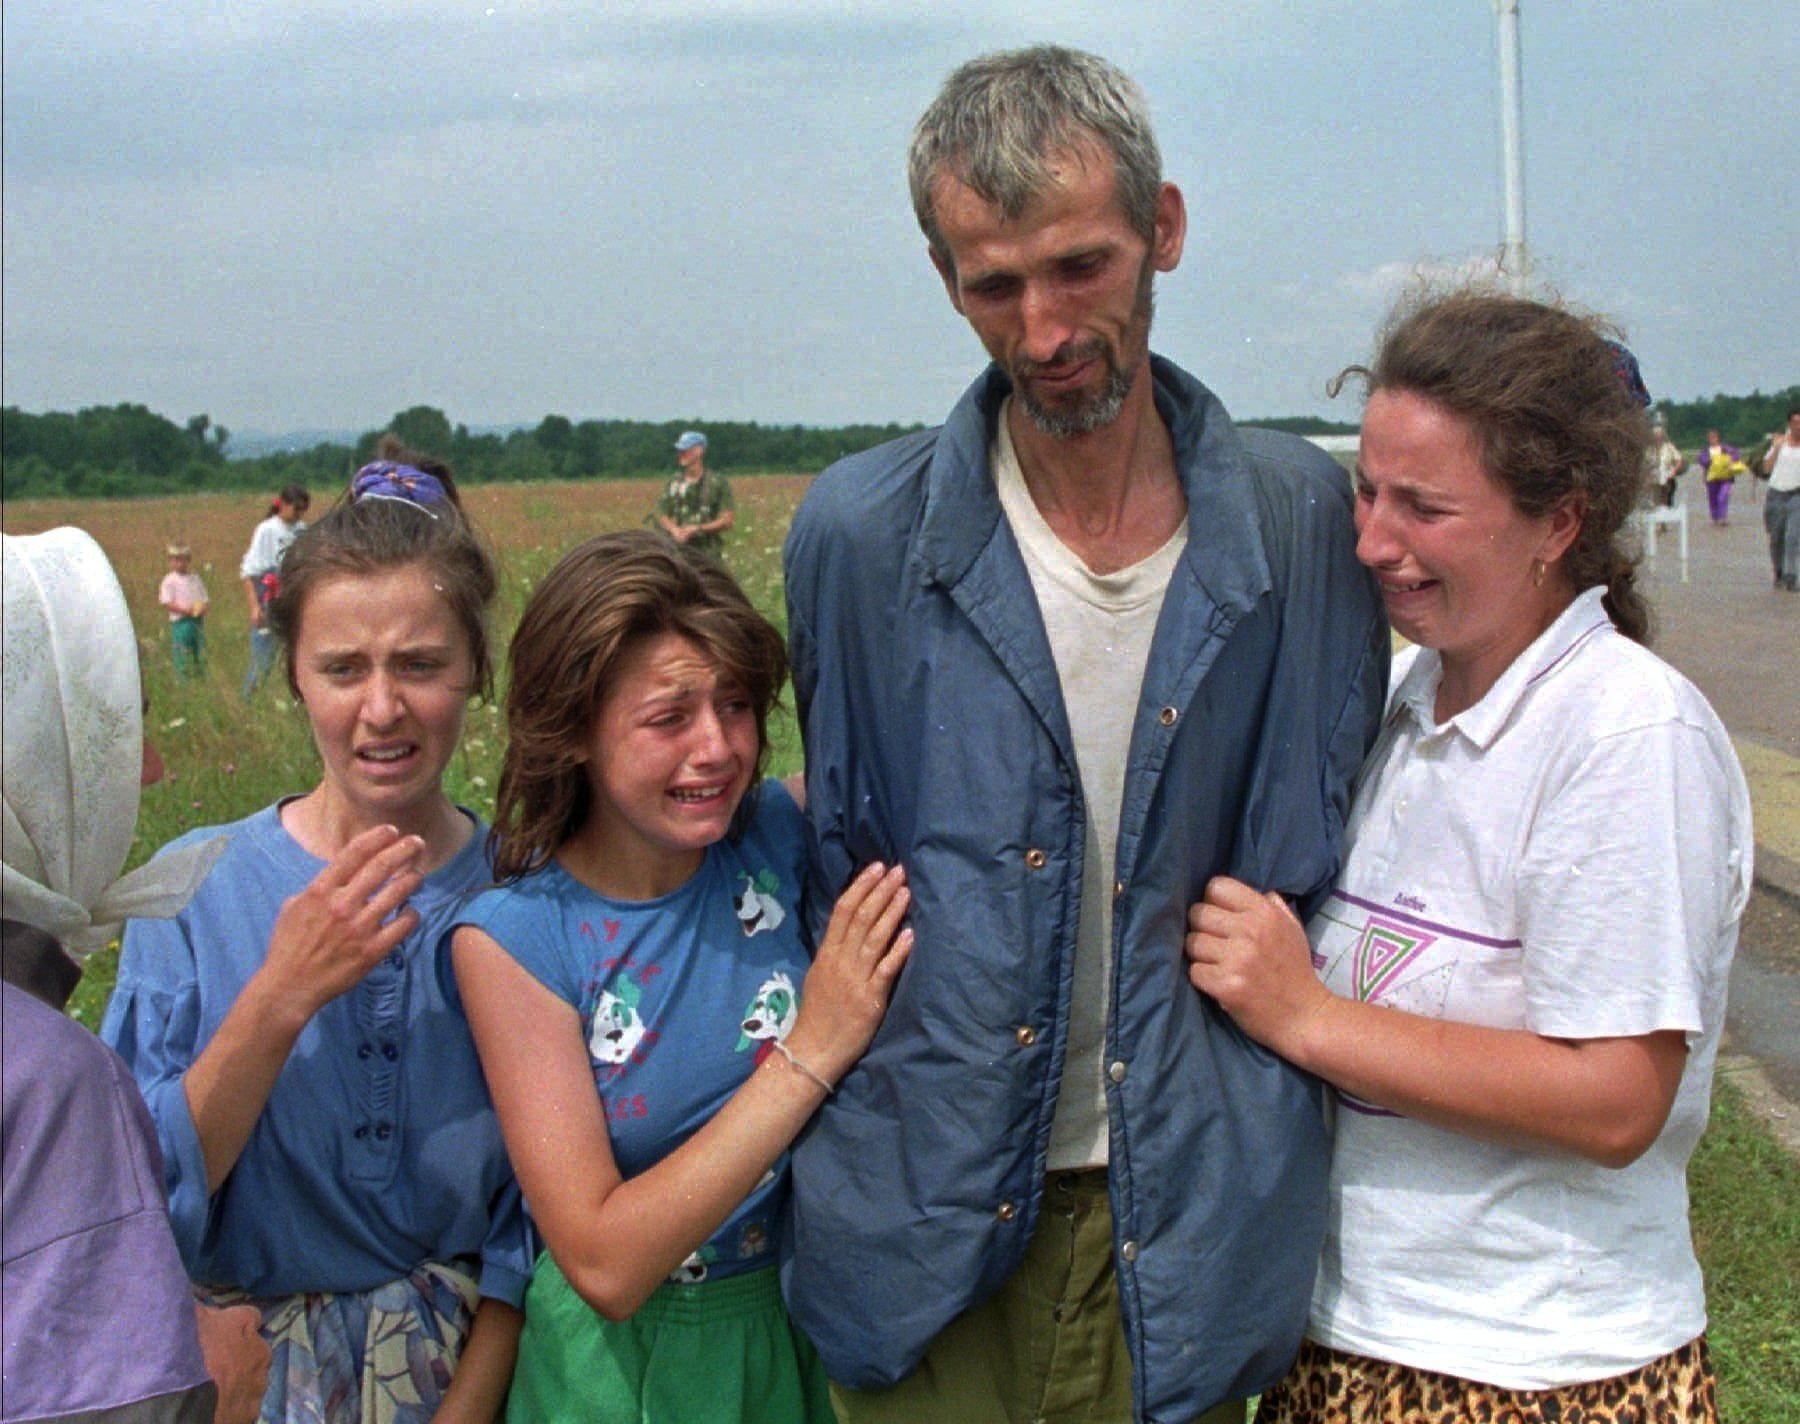 Bosnian refugees cry as their father and husband arrives at the U.N. air base in Tuzla, Bosnia and Herzegovina, after he survived the death march of six days from Srebrenica, July 17, 1995. (AP Photo)